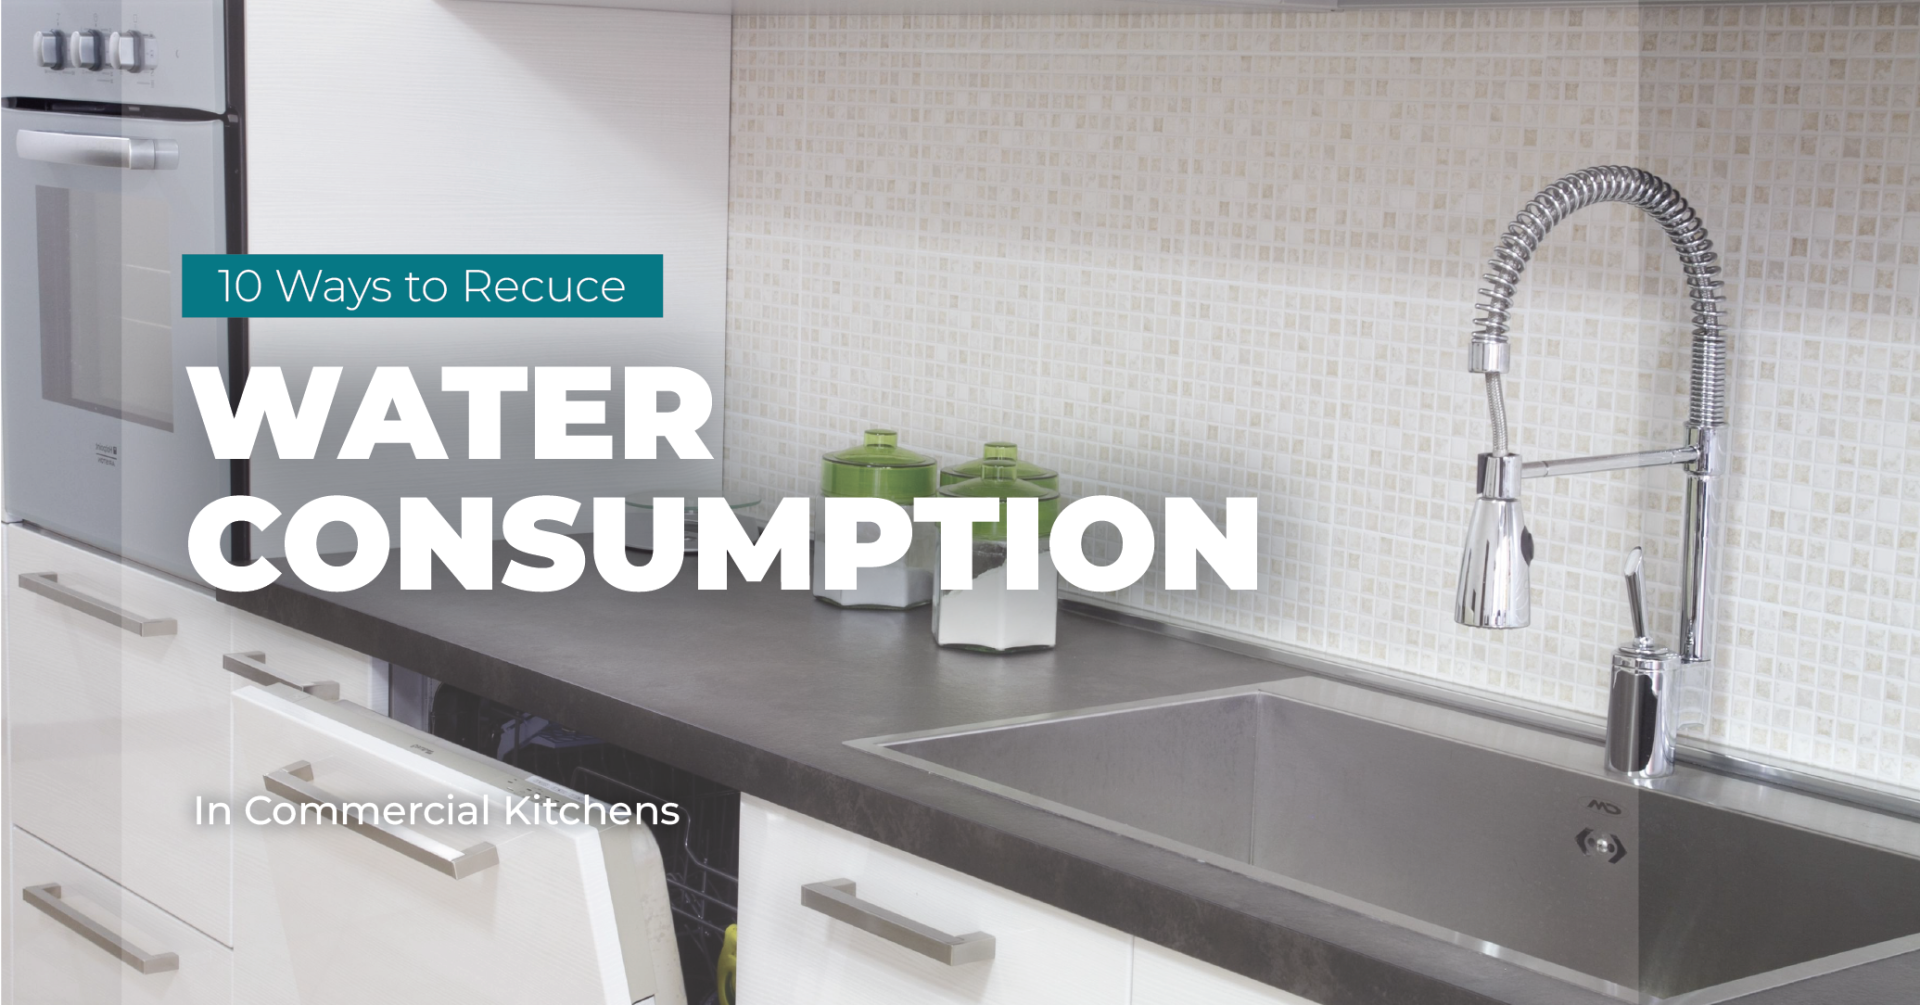 10 ways to reduce water consumption in commercial kitchens